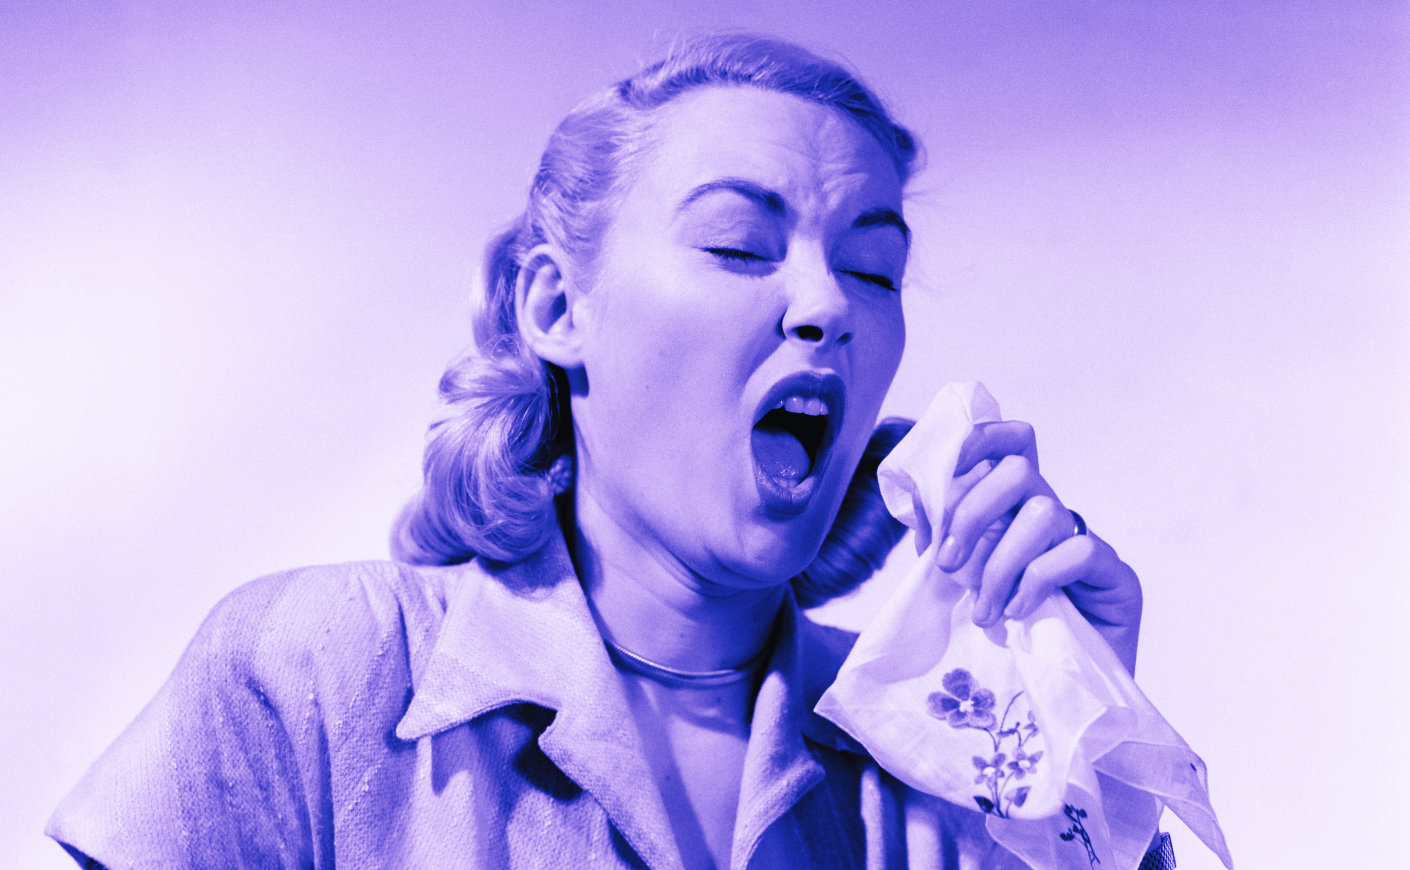 woman sneezing in the 1950s